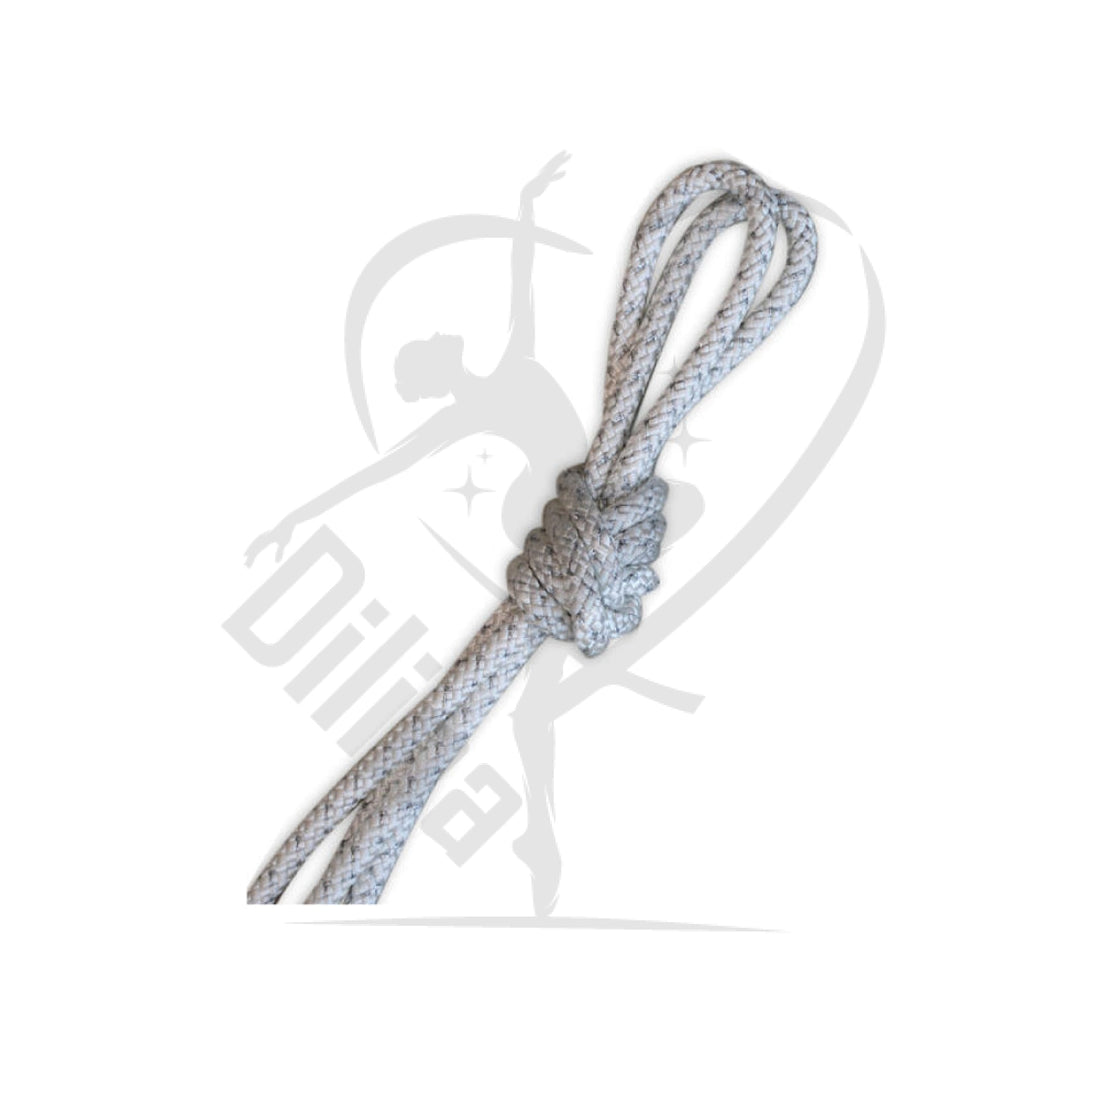 Pastorelli Metallic Gym Rope For Competitions Mod. New Orleans White With Silver Lame Threads Ropes